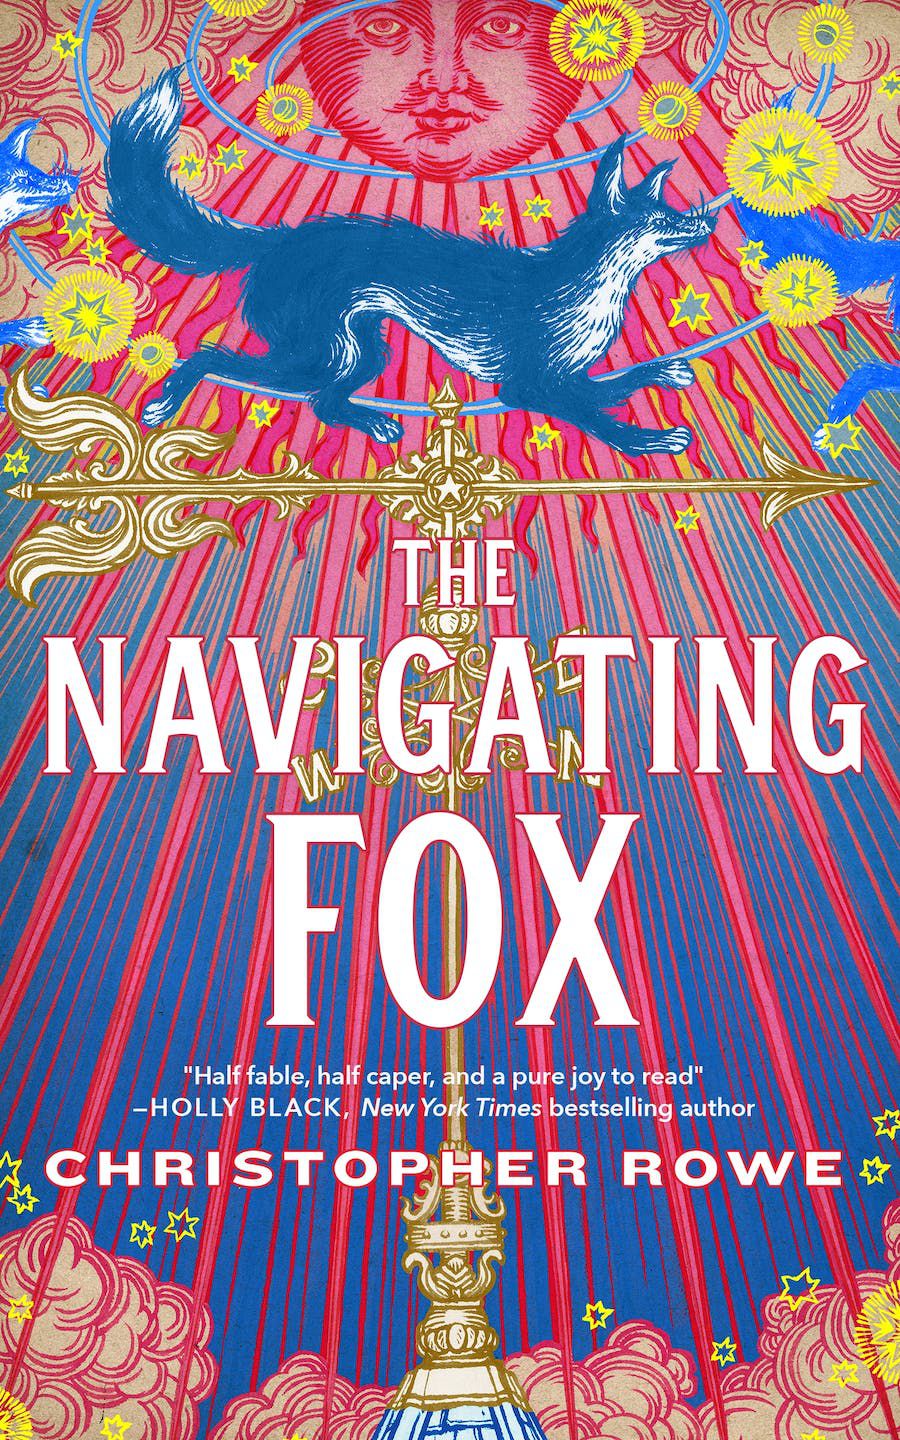 Cover art for Christopher Rowe’s The Navigating Fox. It is a colorful image, with shades of blue, pink and yellow. A blue fox sits at the top, above what looks like a scepter crossed with an arrow, and below a sun.